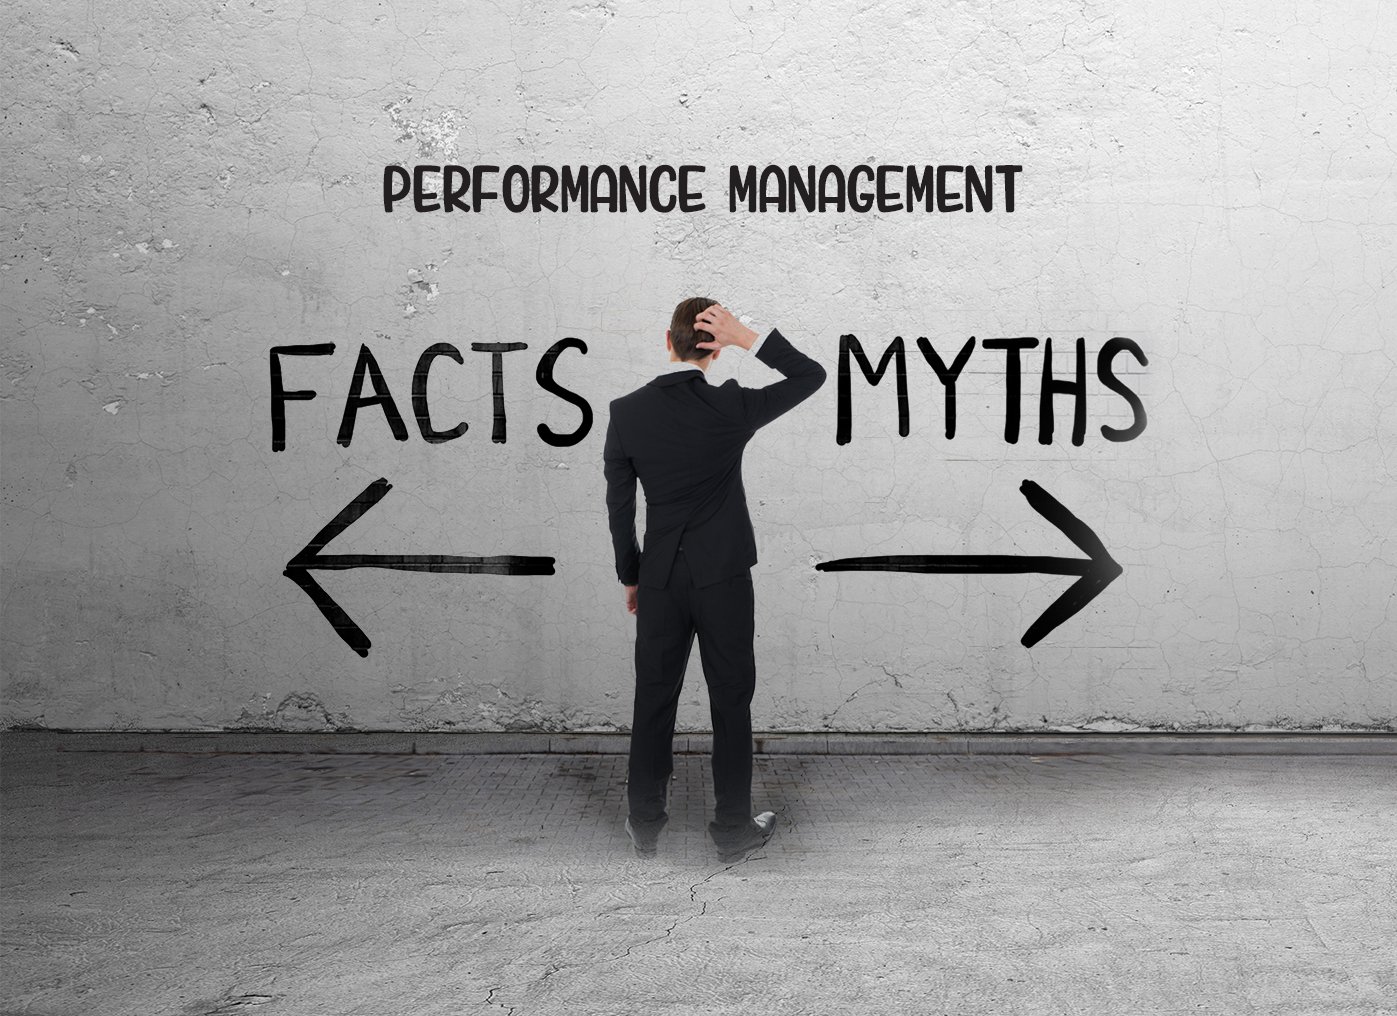 Three Myths About Performance Management